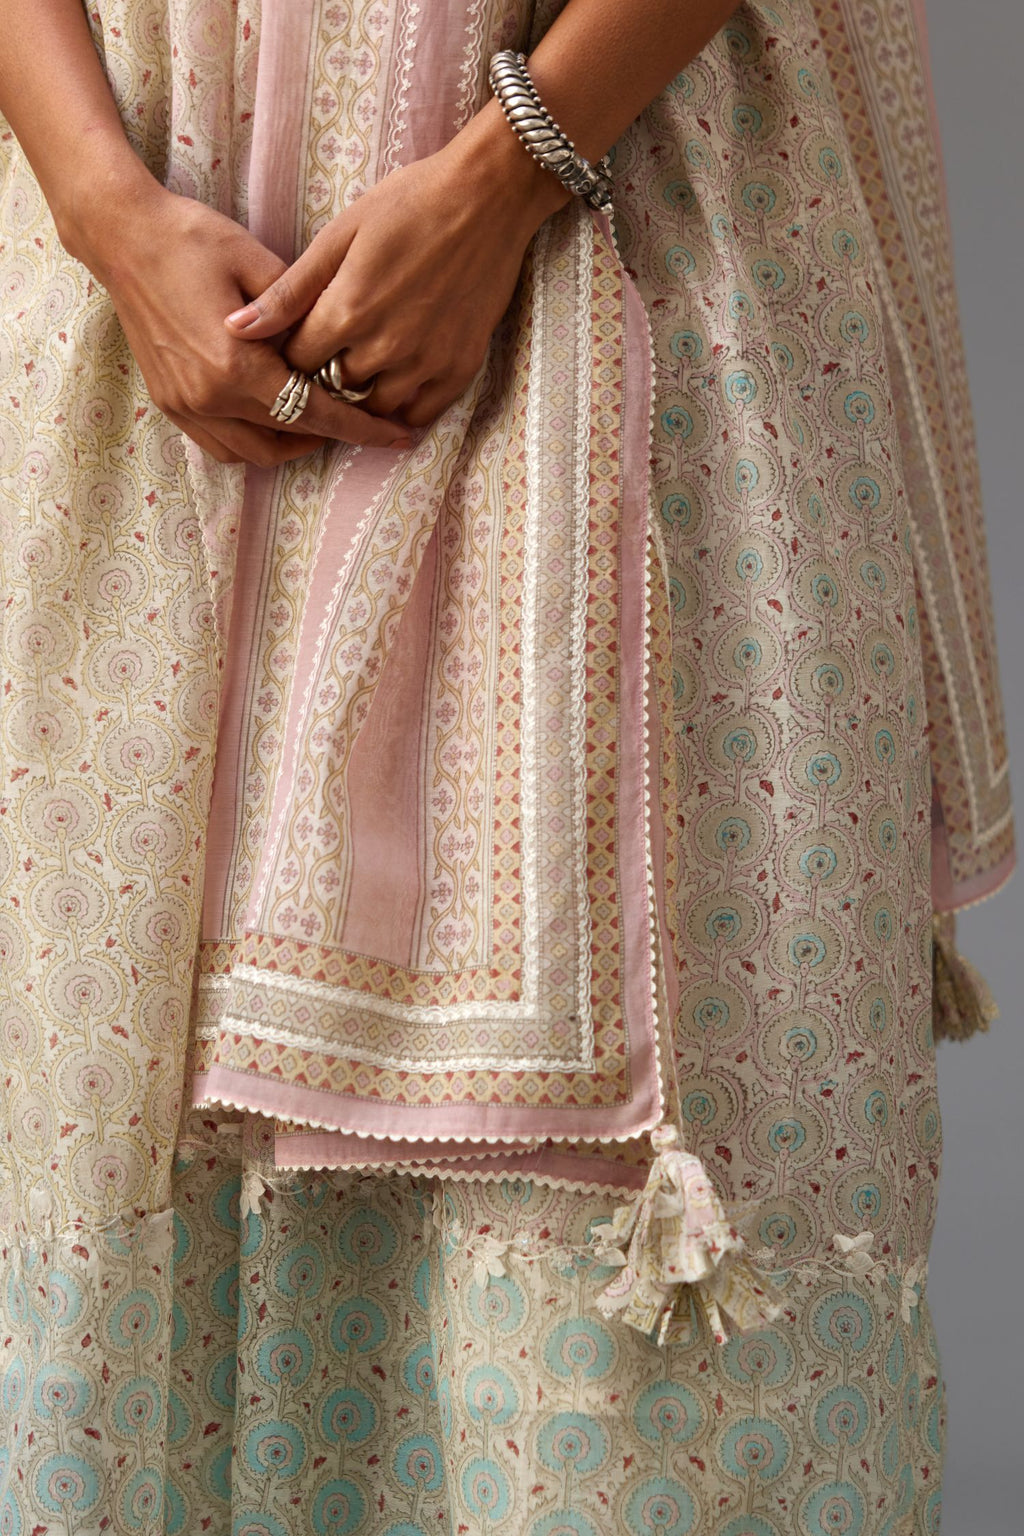 Pink & grey hand block printed Cotton Chanderi dupatta, with embroidery and ric-rac lace.